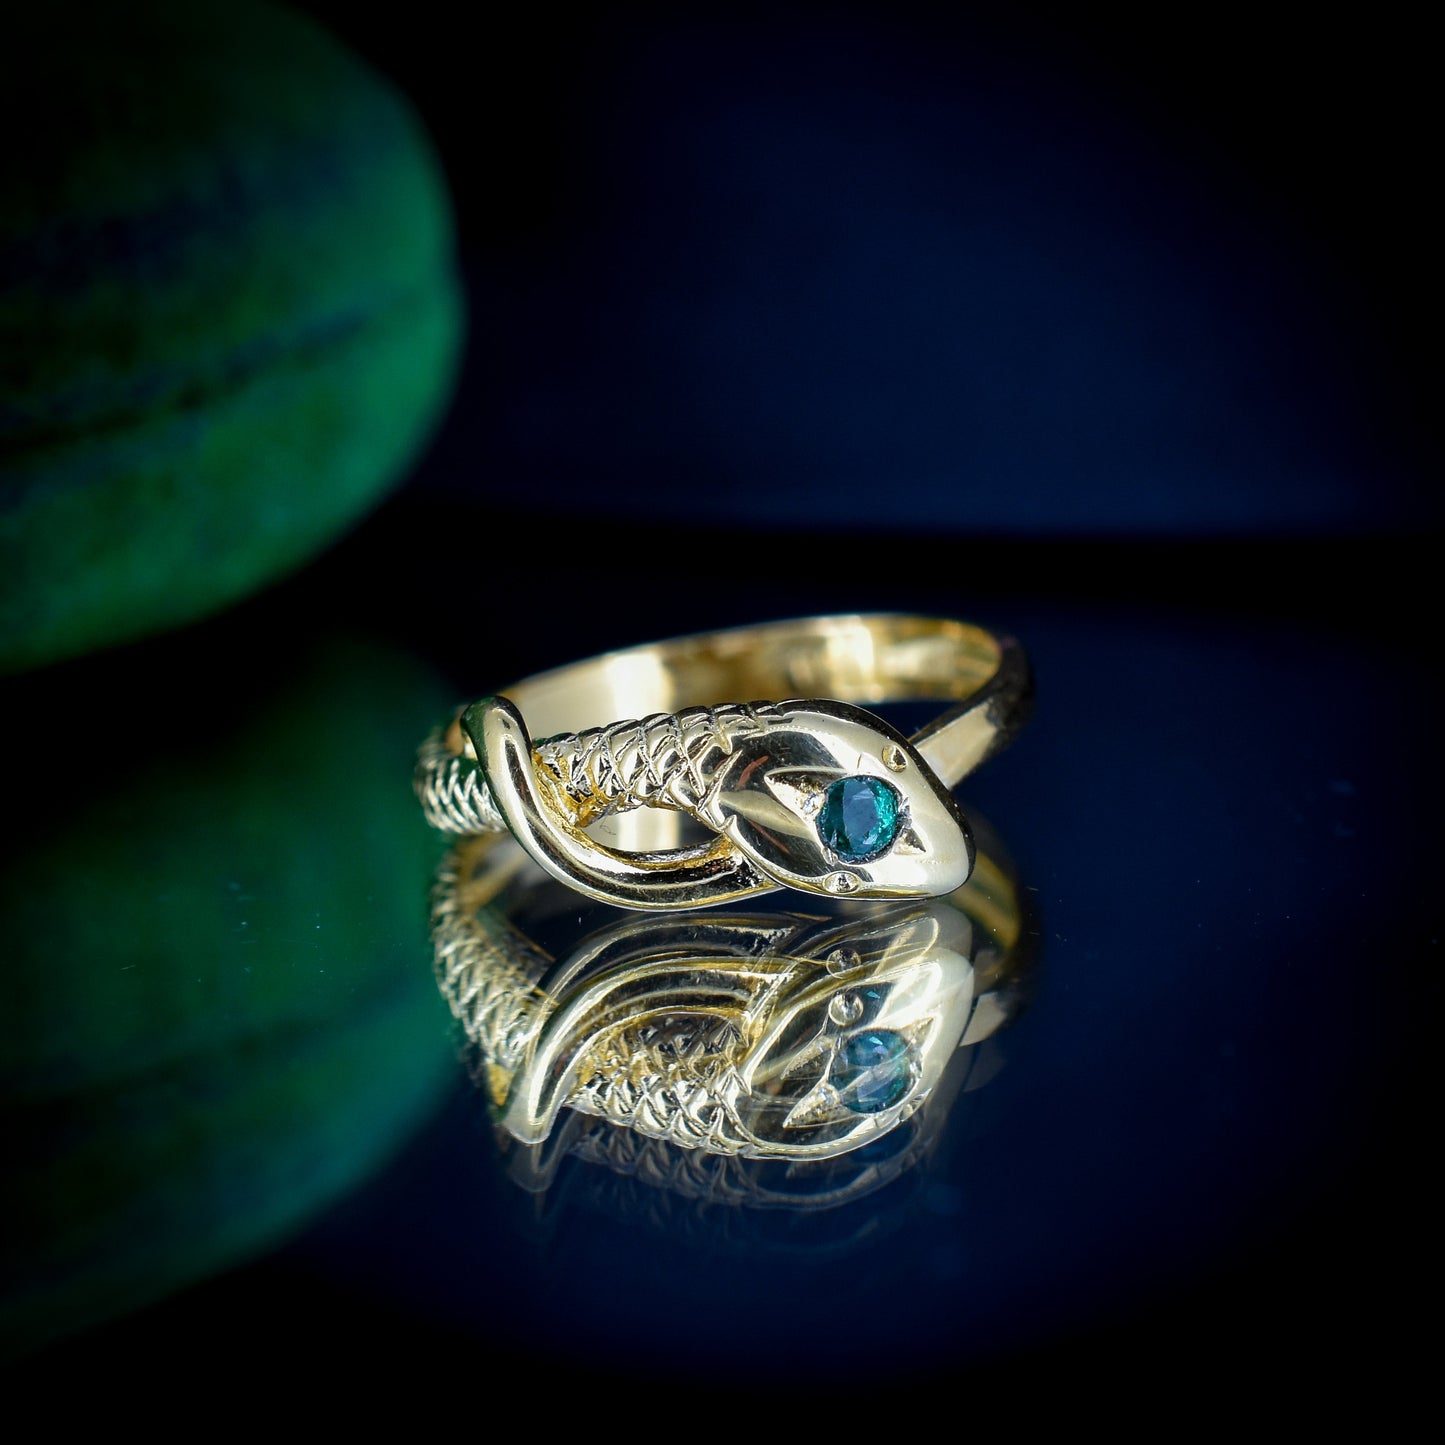 Emerald Snake Serpent 18ct Yellow Gold on Silver Ring | Antique Victorian Style